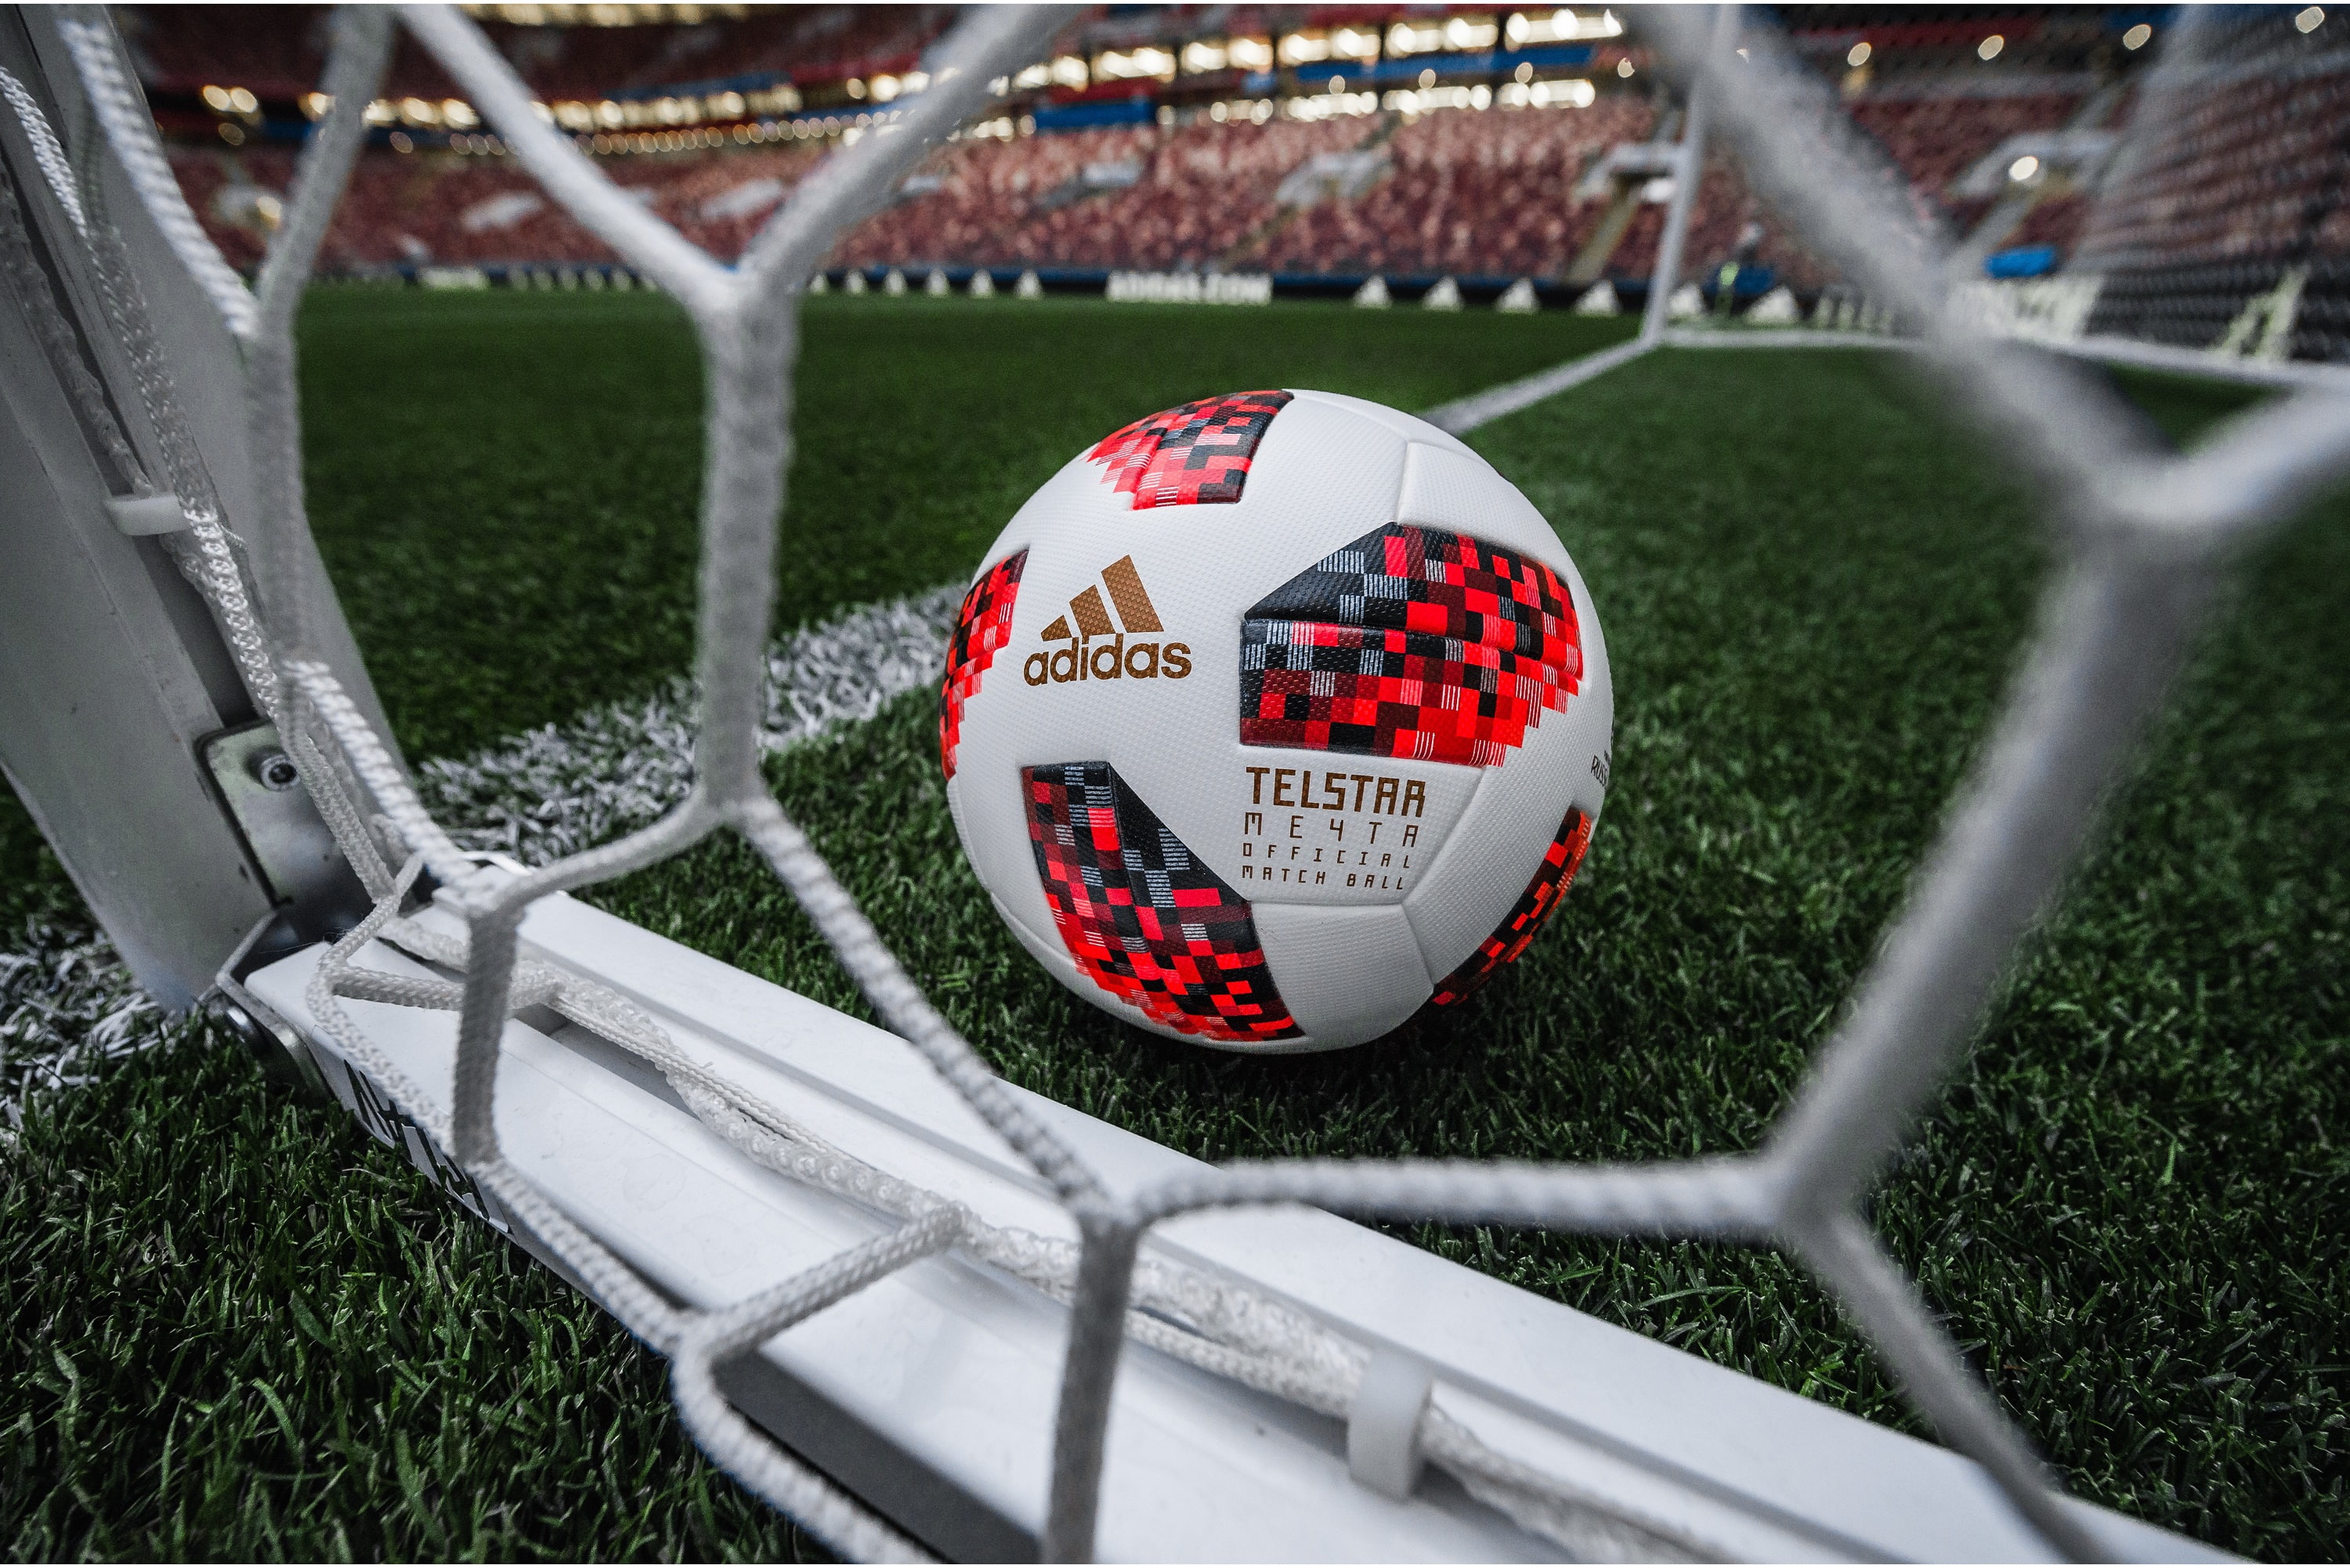 Adidas Soccer Ball In The Field